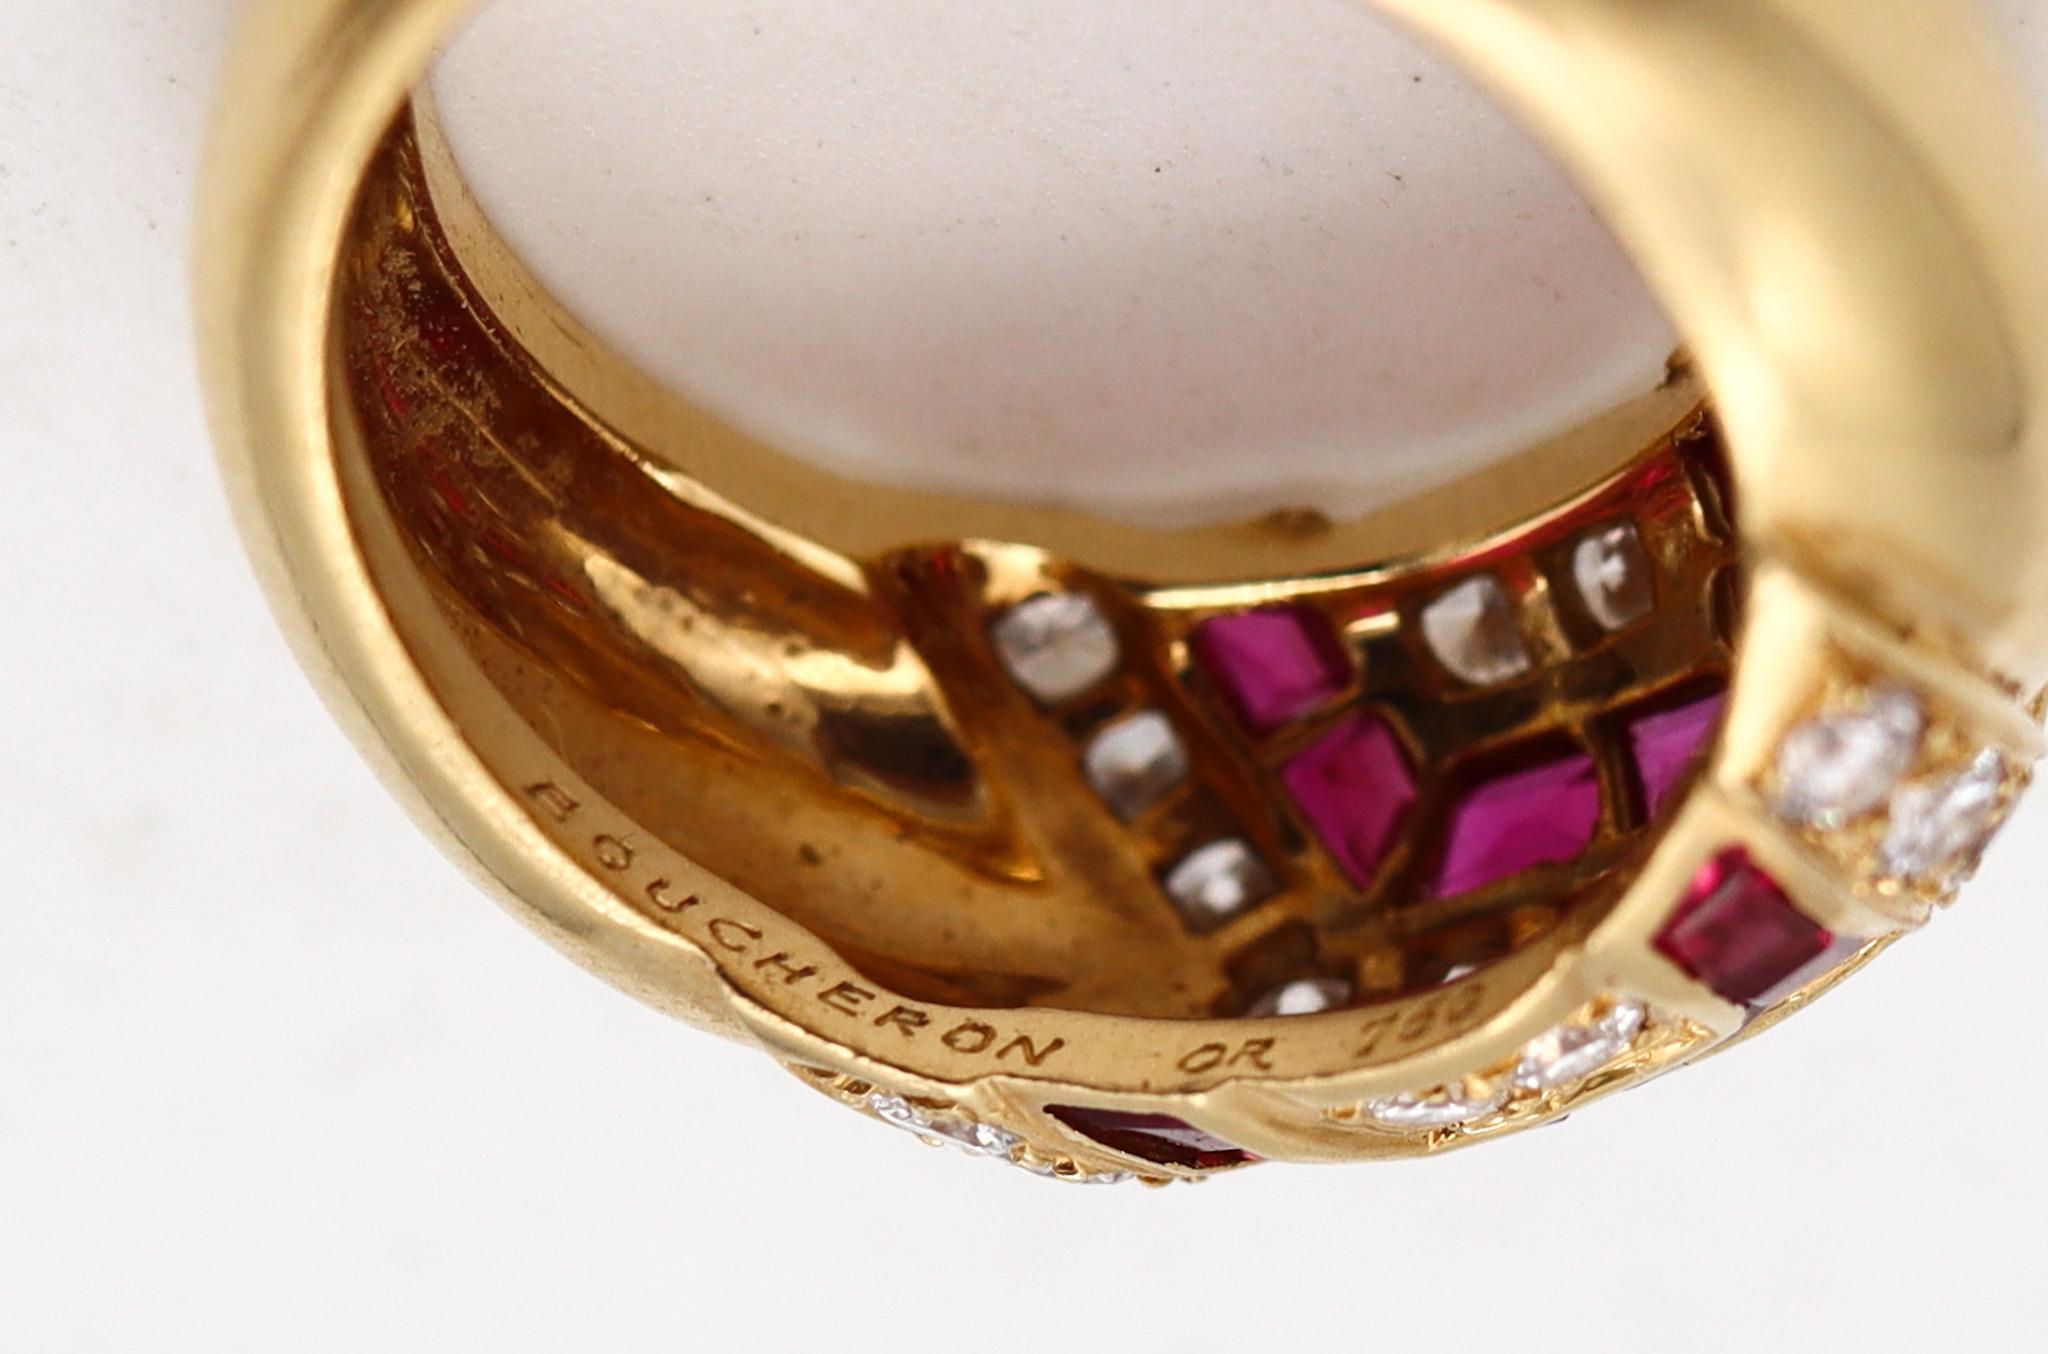 Boucheron Paris Modernist Ring In 18Kt Gold With 1.94 Ctw In Diamonds And Rubies For Sale 1